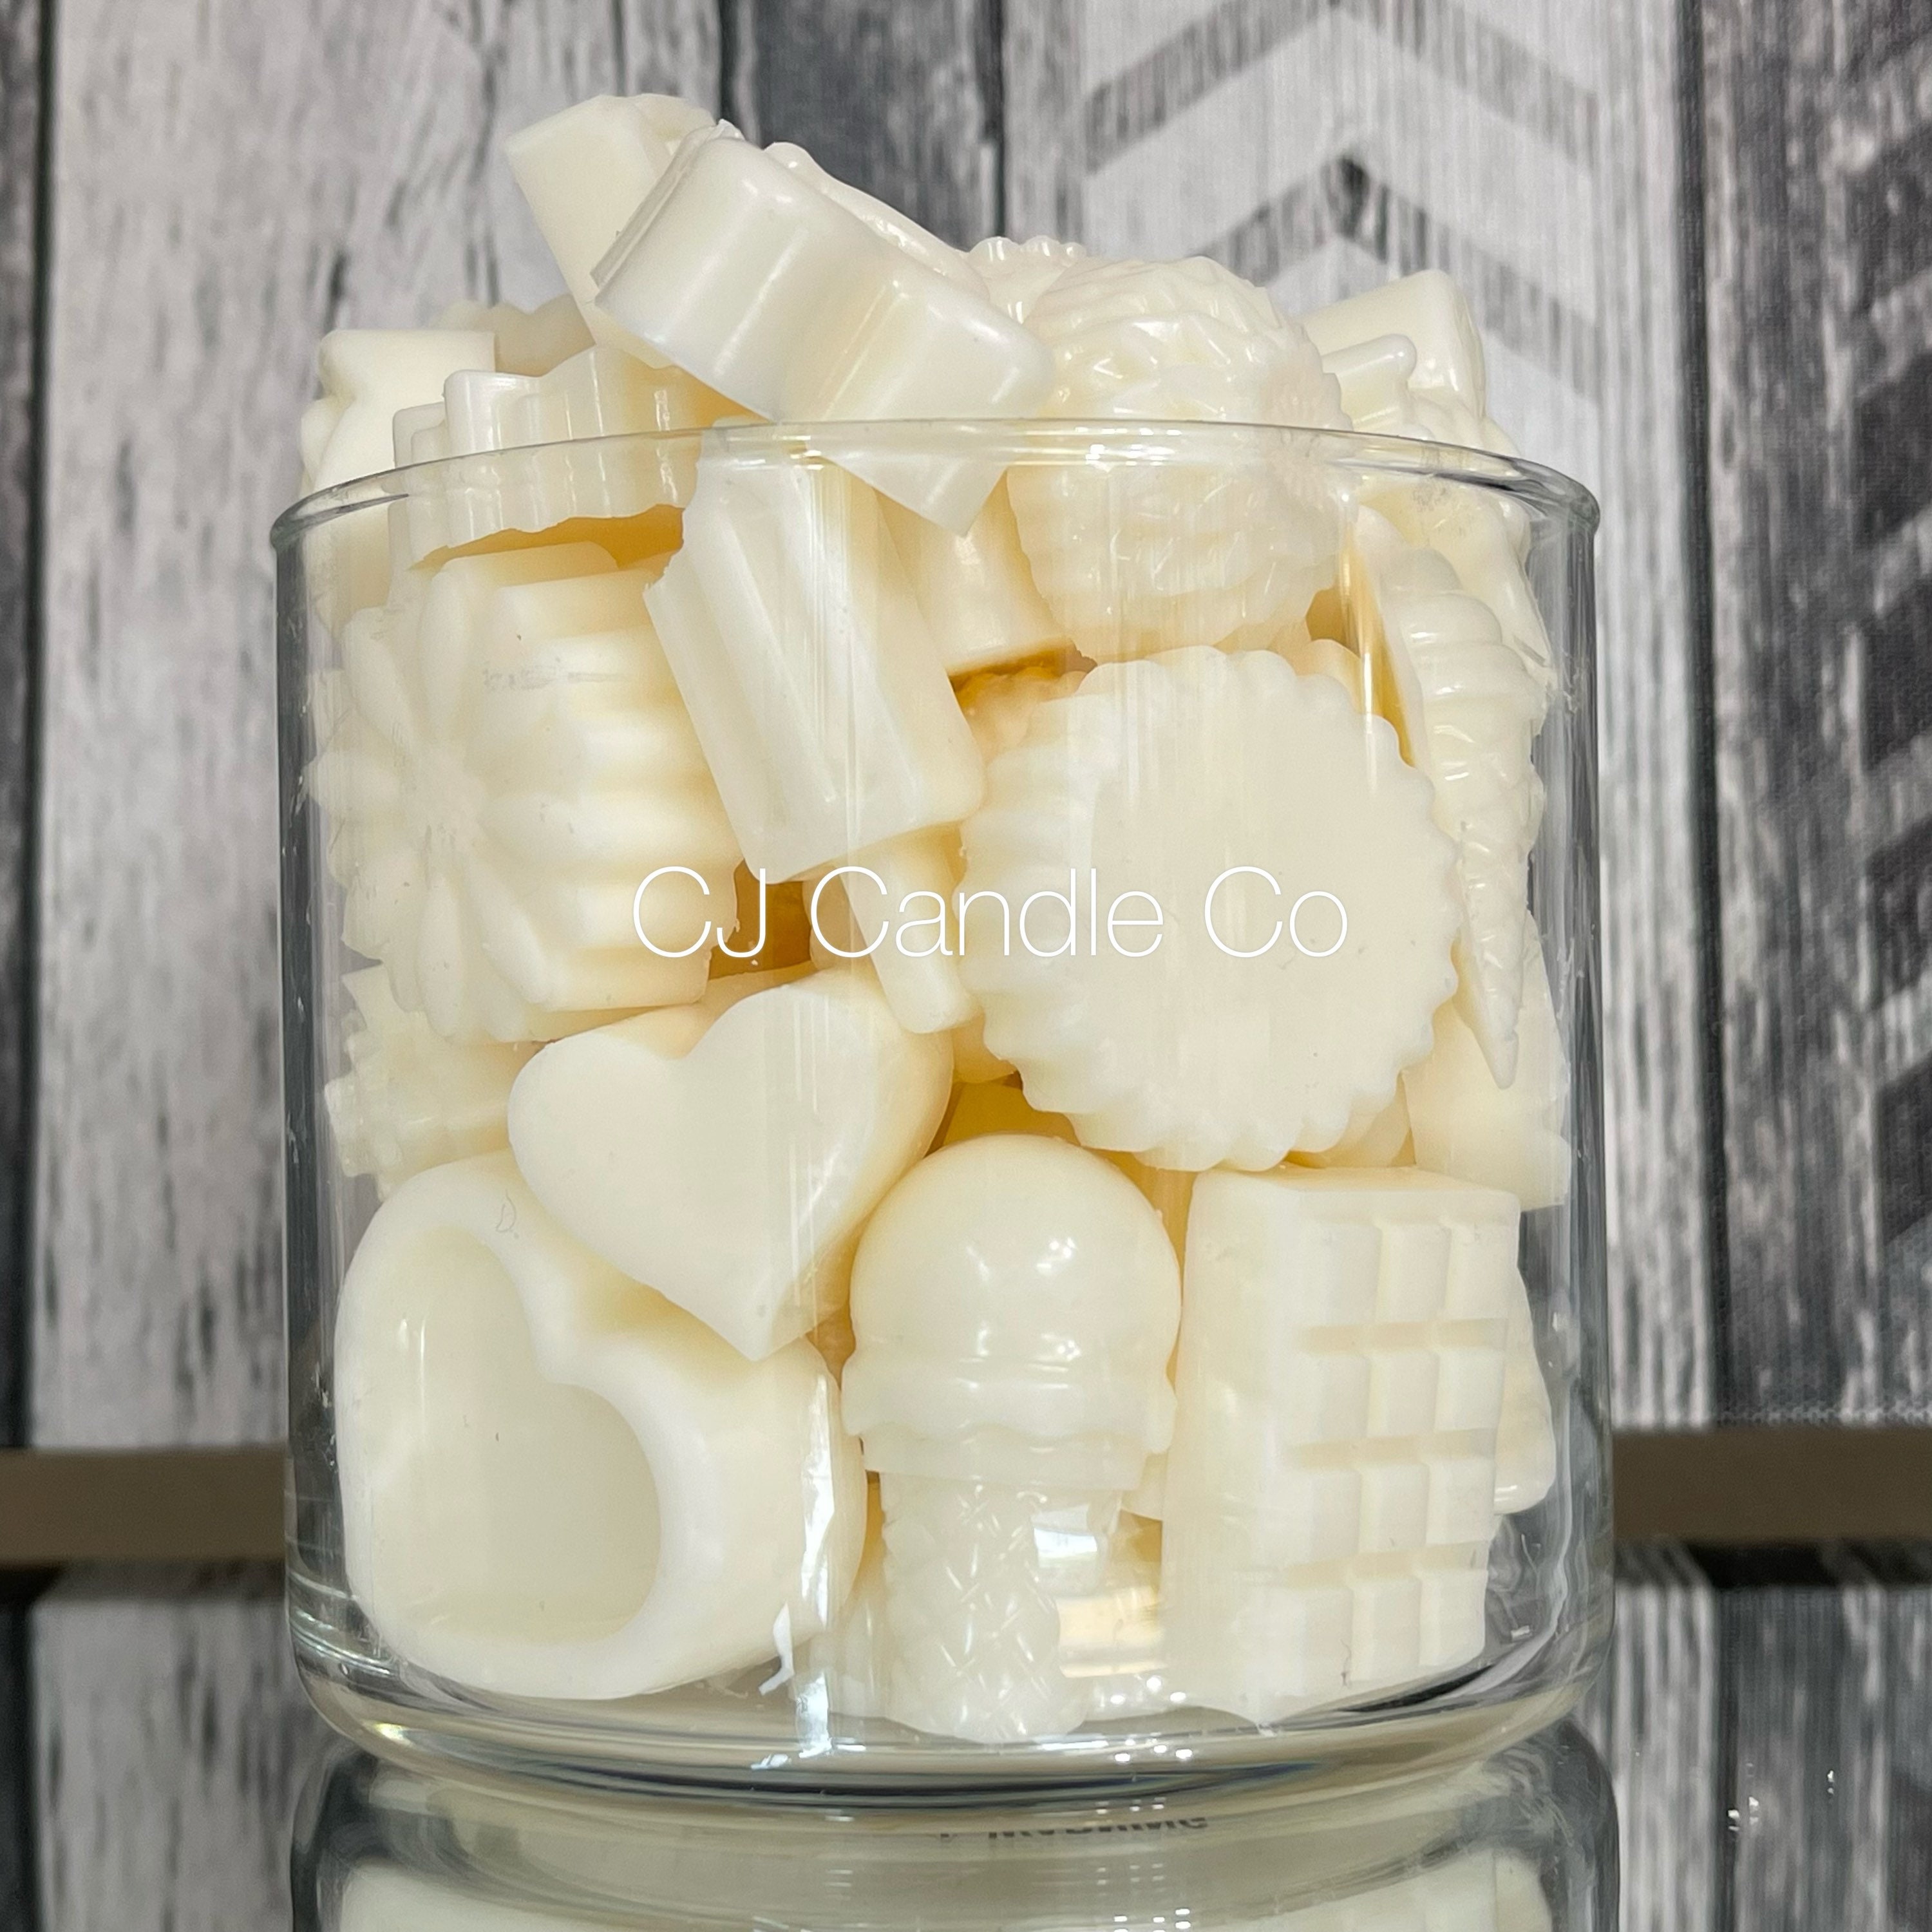 Organic Beeswax Melts – Rose Creek Candle Co.